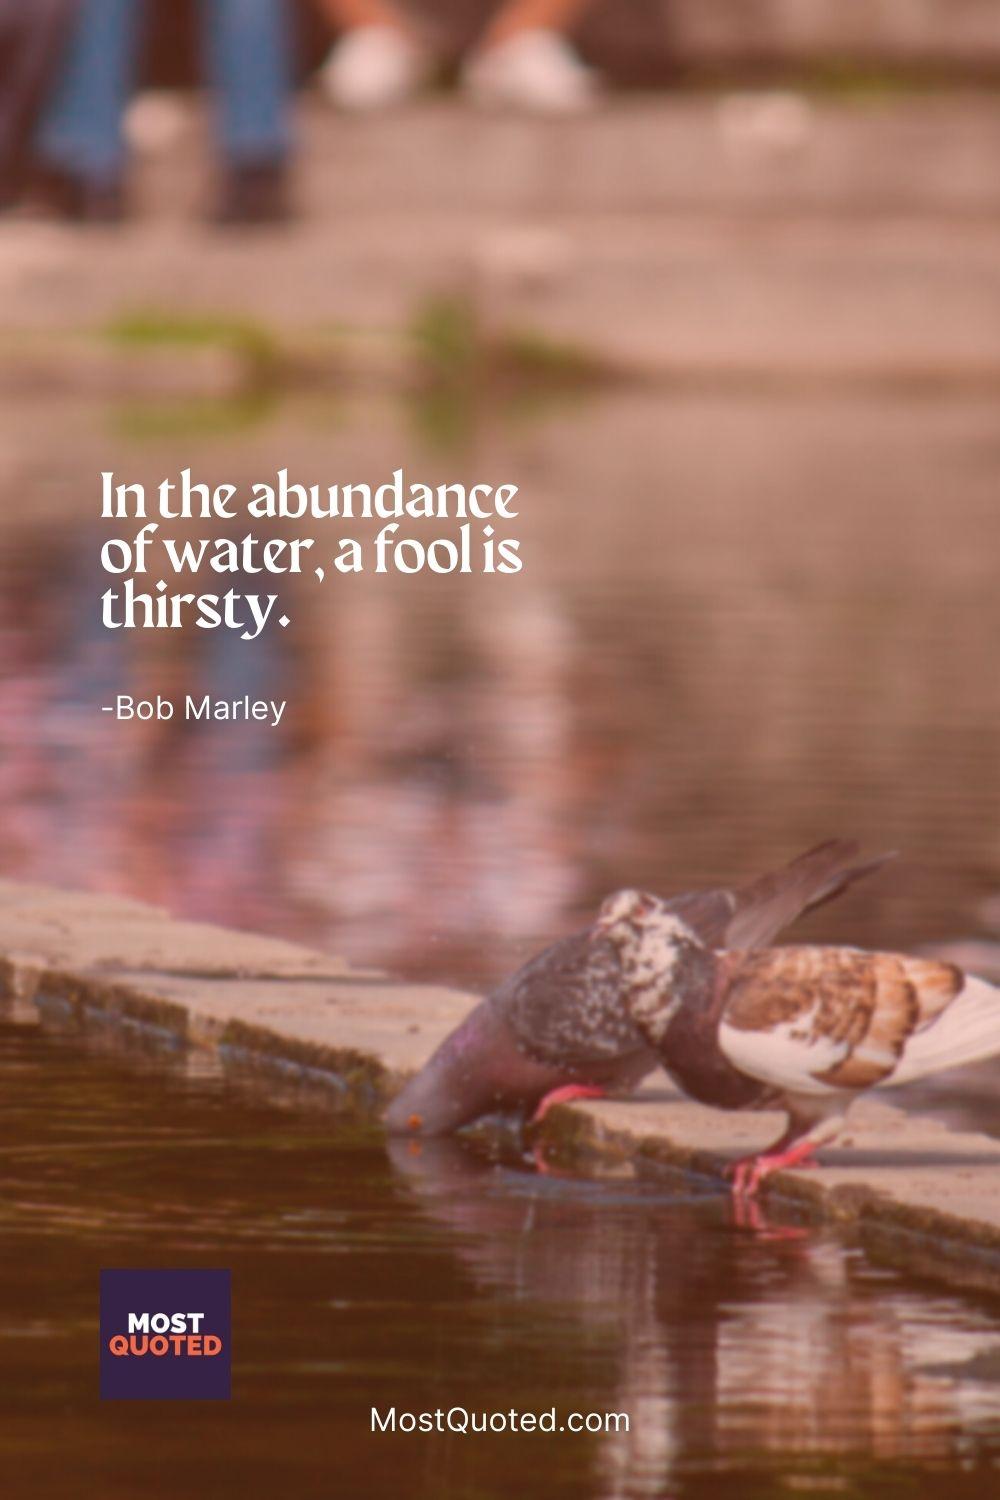 In the abundance of water, a fool is thirsty. - Bob Marley